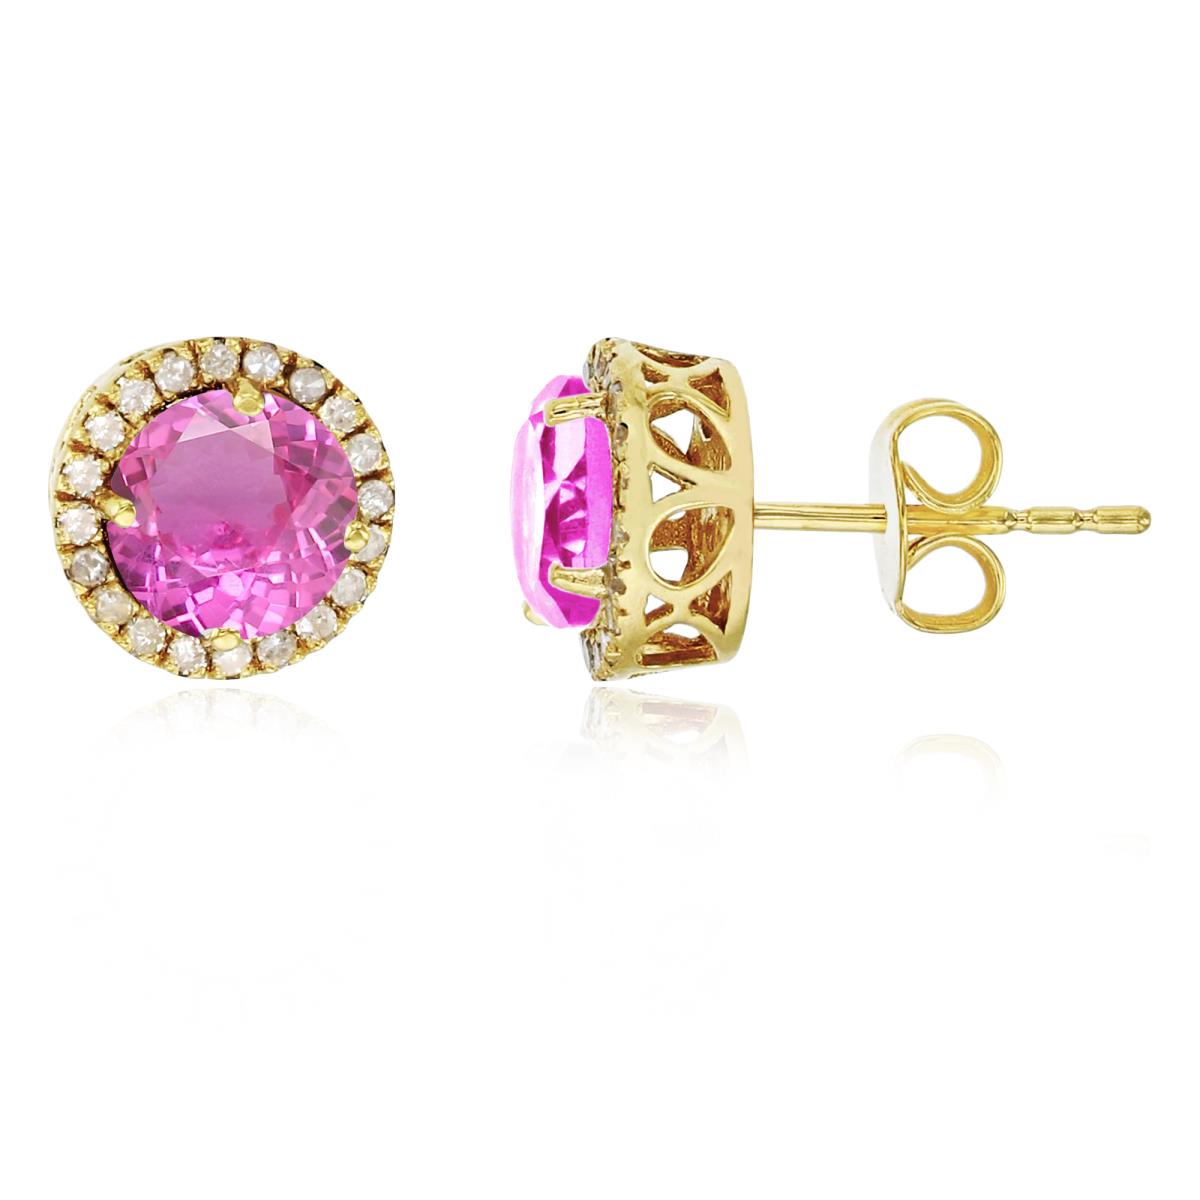 Sterling Silver Yellow 6mm Round Cr Pink Sapphire & Cr White Sapphire Halo Stud Earring